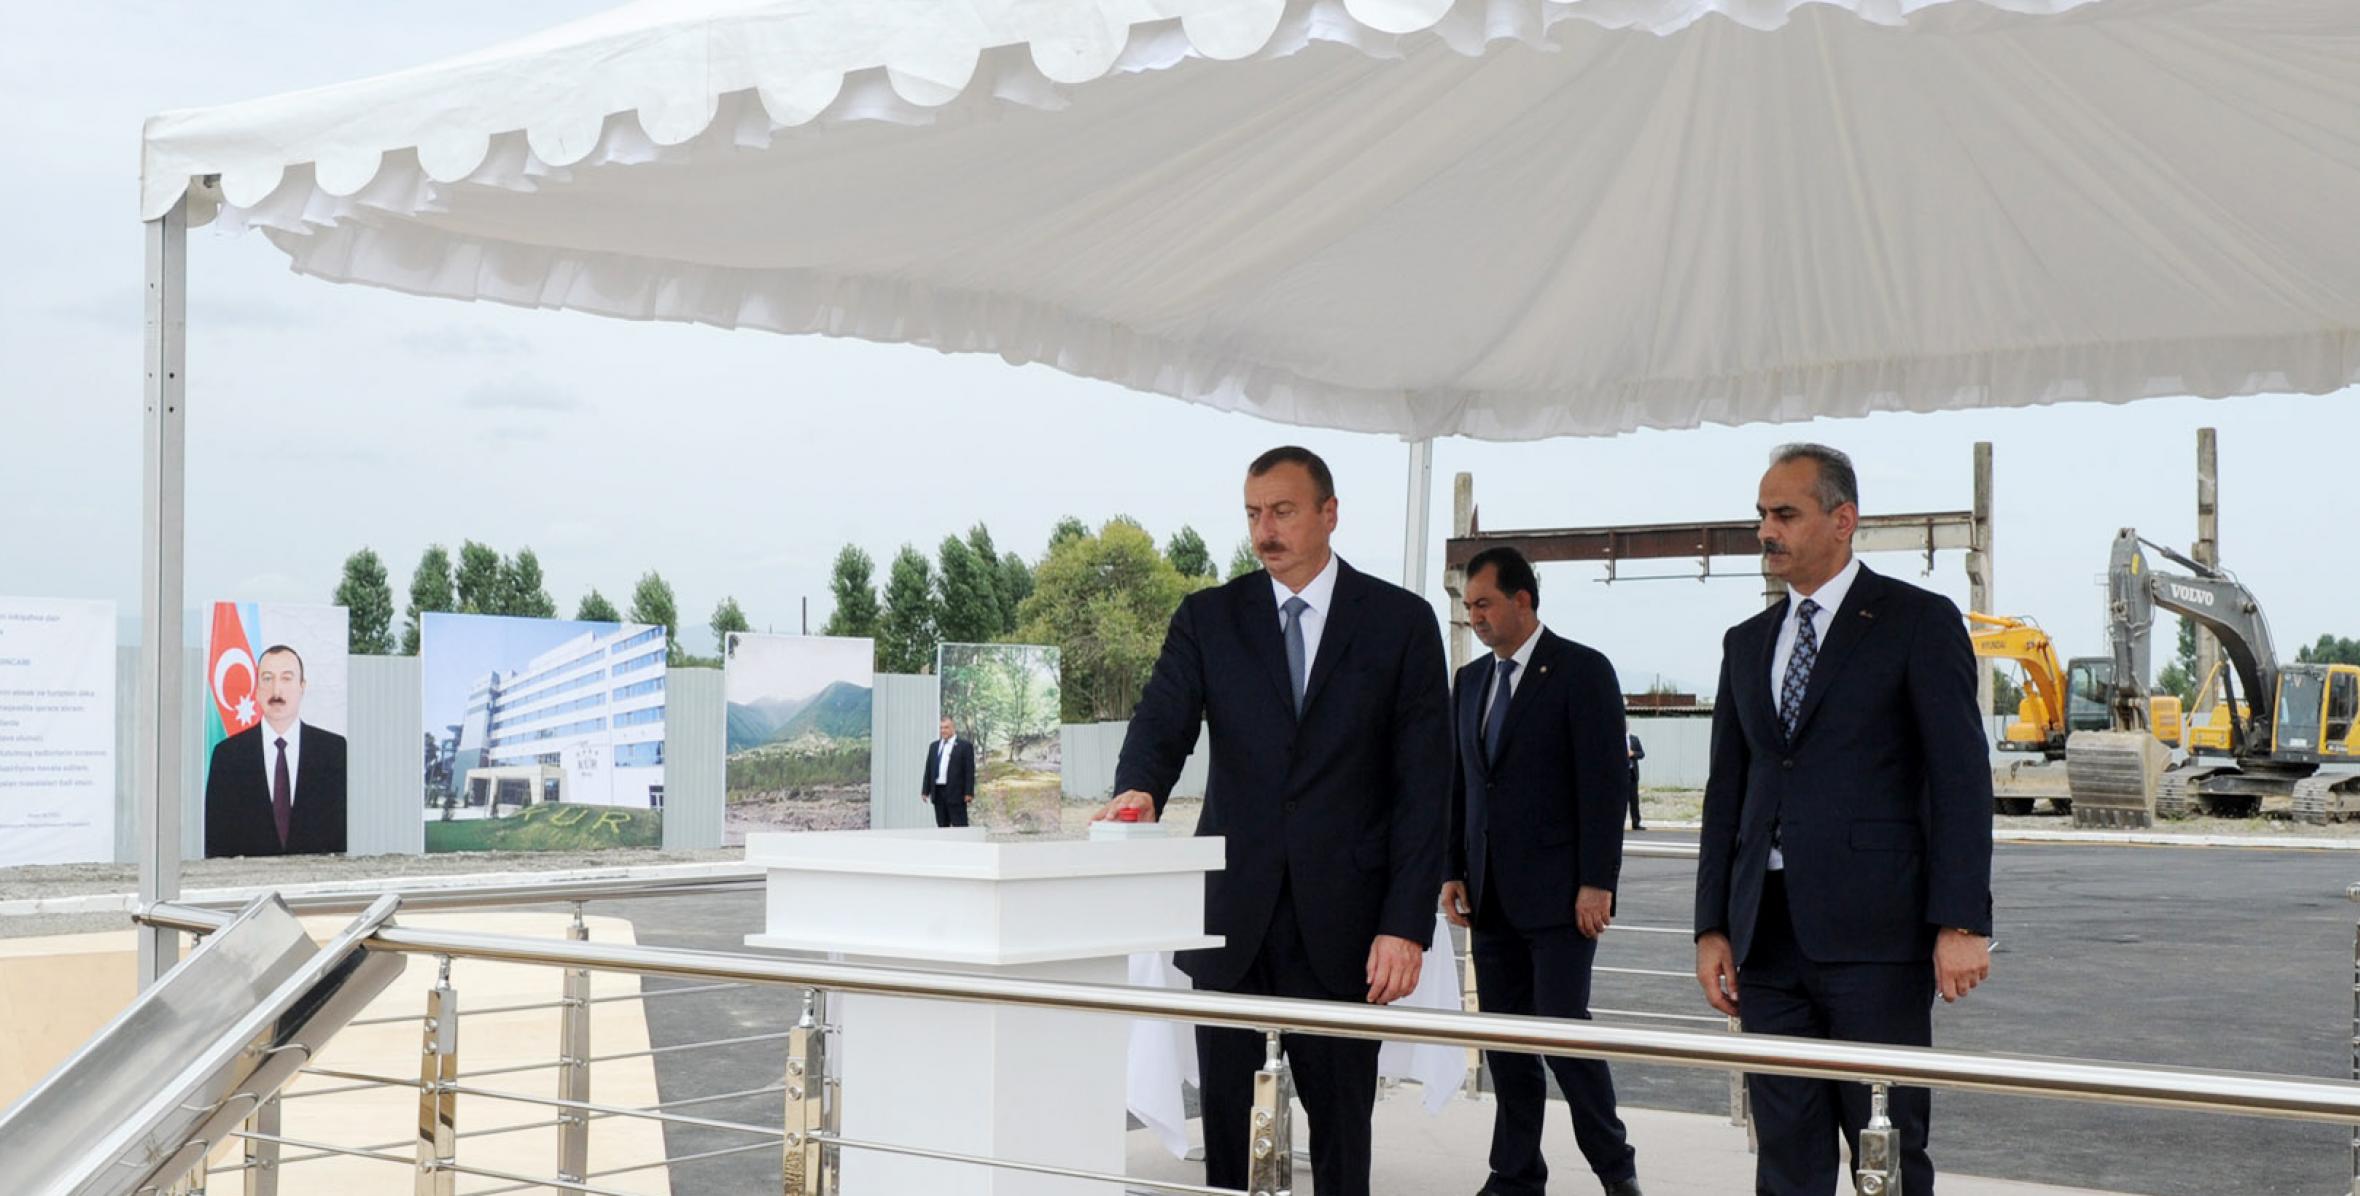 Ilham Aliyev attended the groundbreaking ceremony for a hotel complex in Lankaran